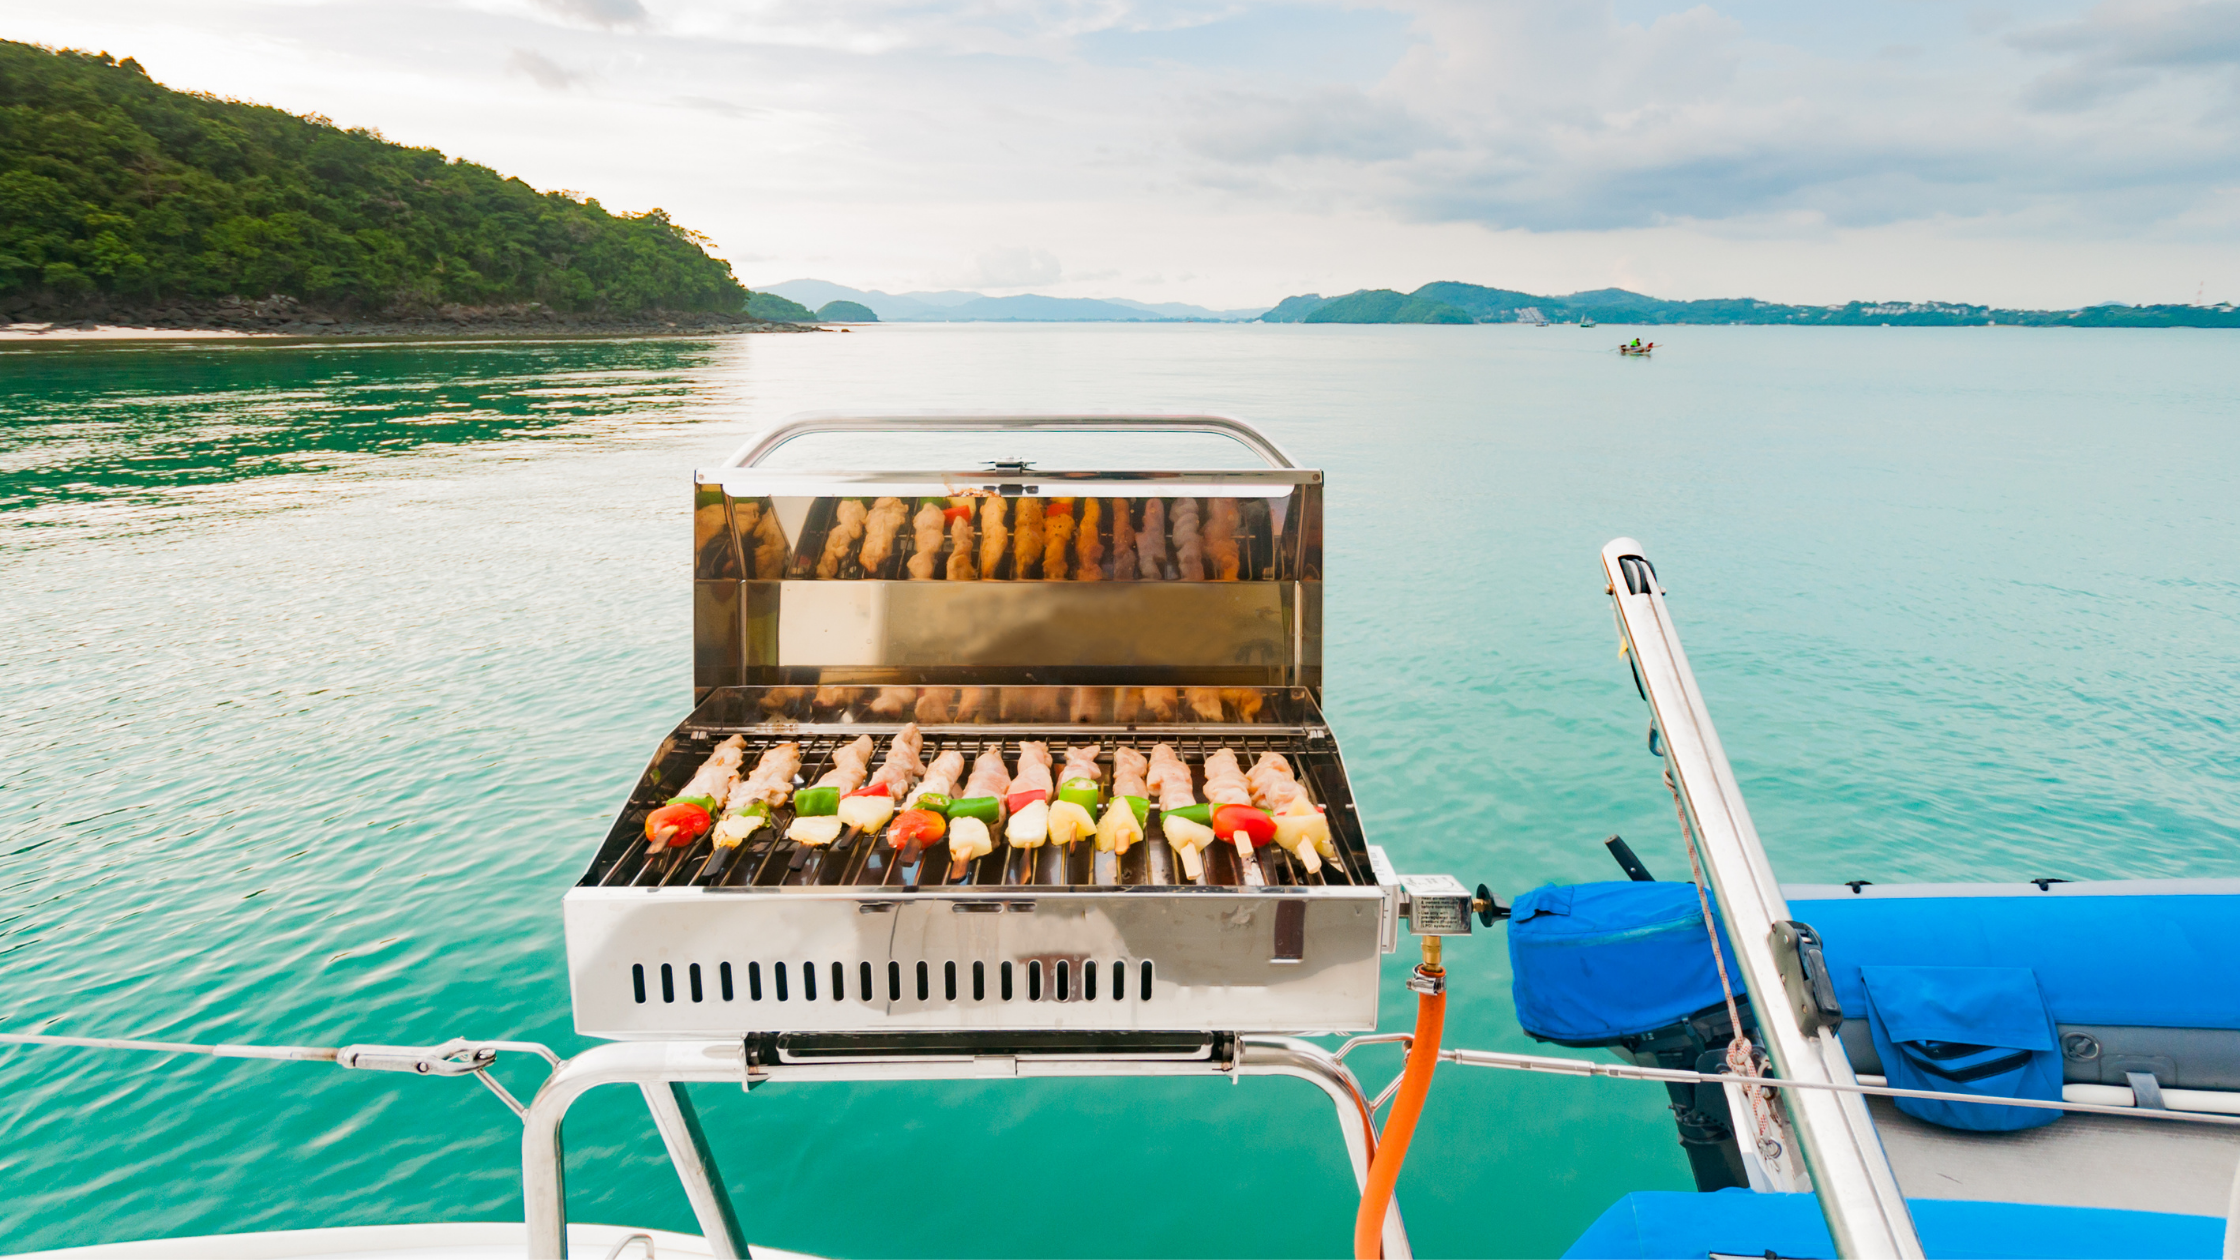 Snag-A-Slip Blog - Top Boating Supplies for Cooking on your BoatSnag-A-Slip Blog - Top Boating Supplies for Cooking on your Boat